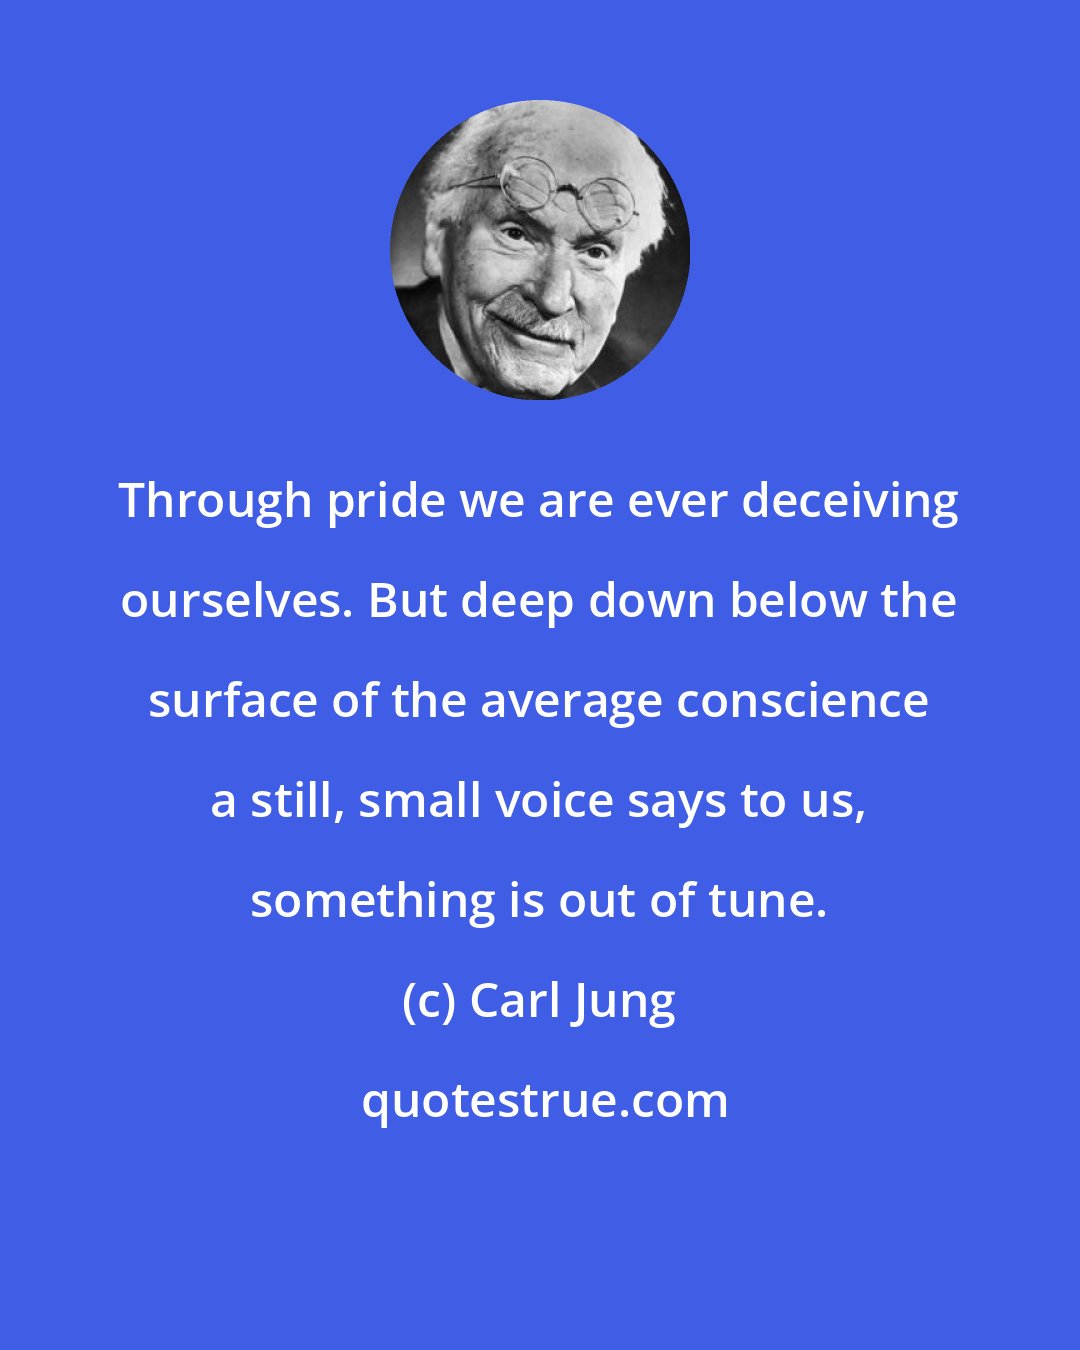 Carl Jung: Through pride we are ever deceiving ourselves. But deep down below the surface of the average conscience a still, small voice says to us, something is out of tune.